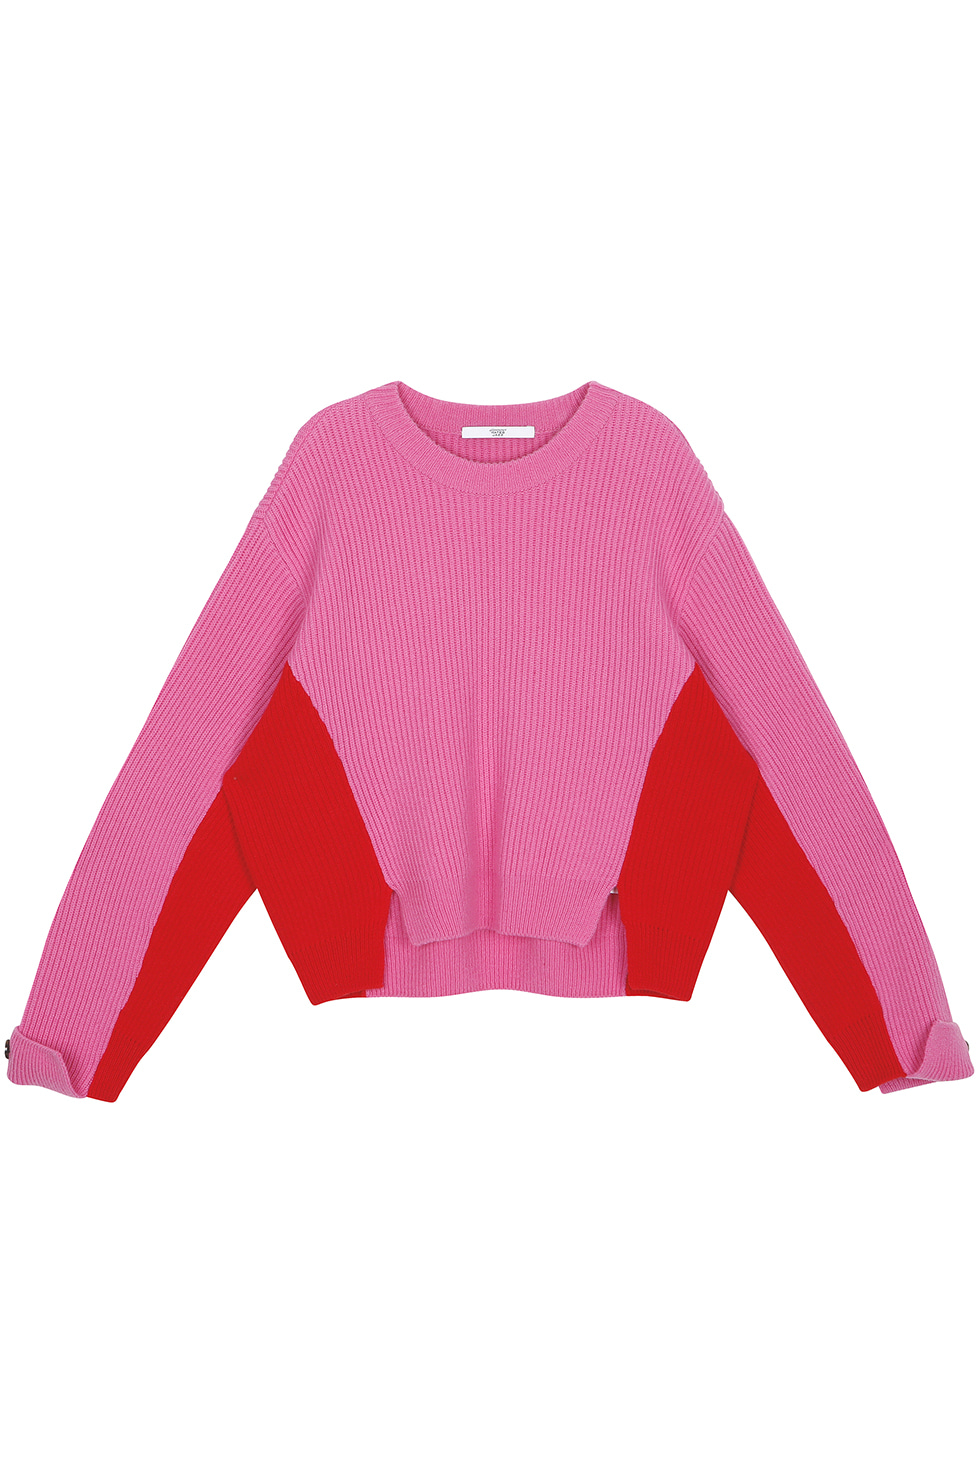 COLOR BLOCK KNIT PULLOVER - PINK